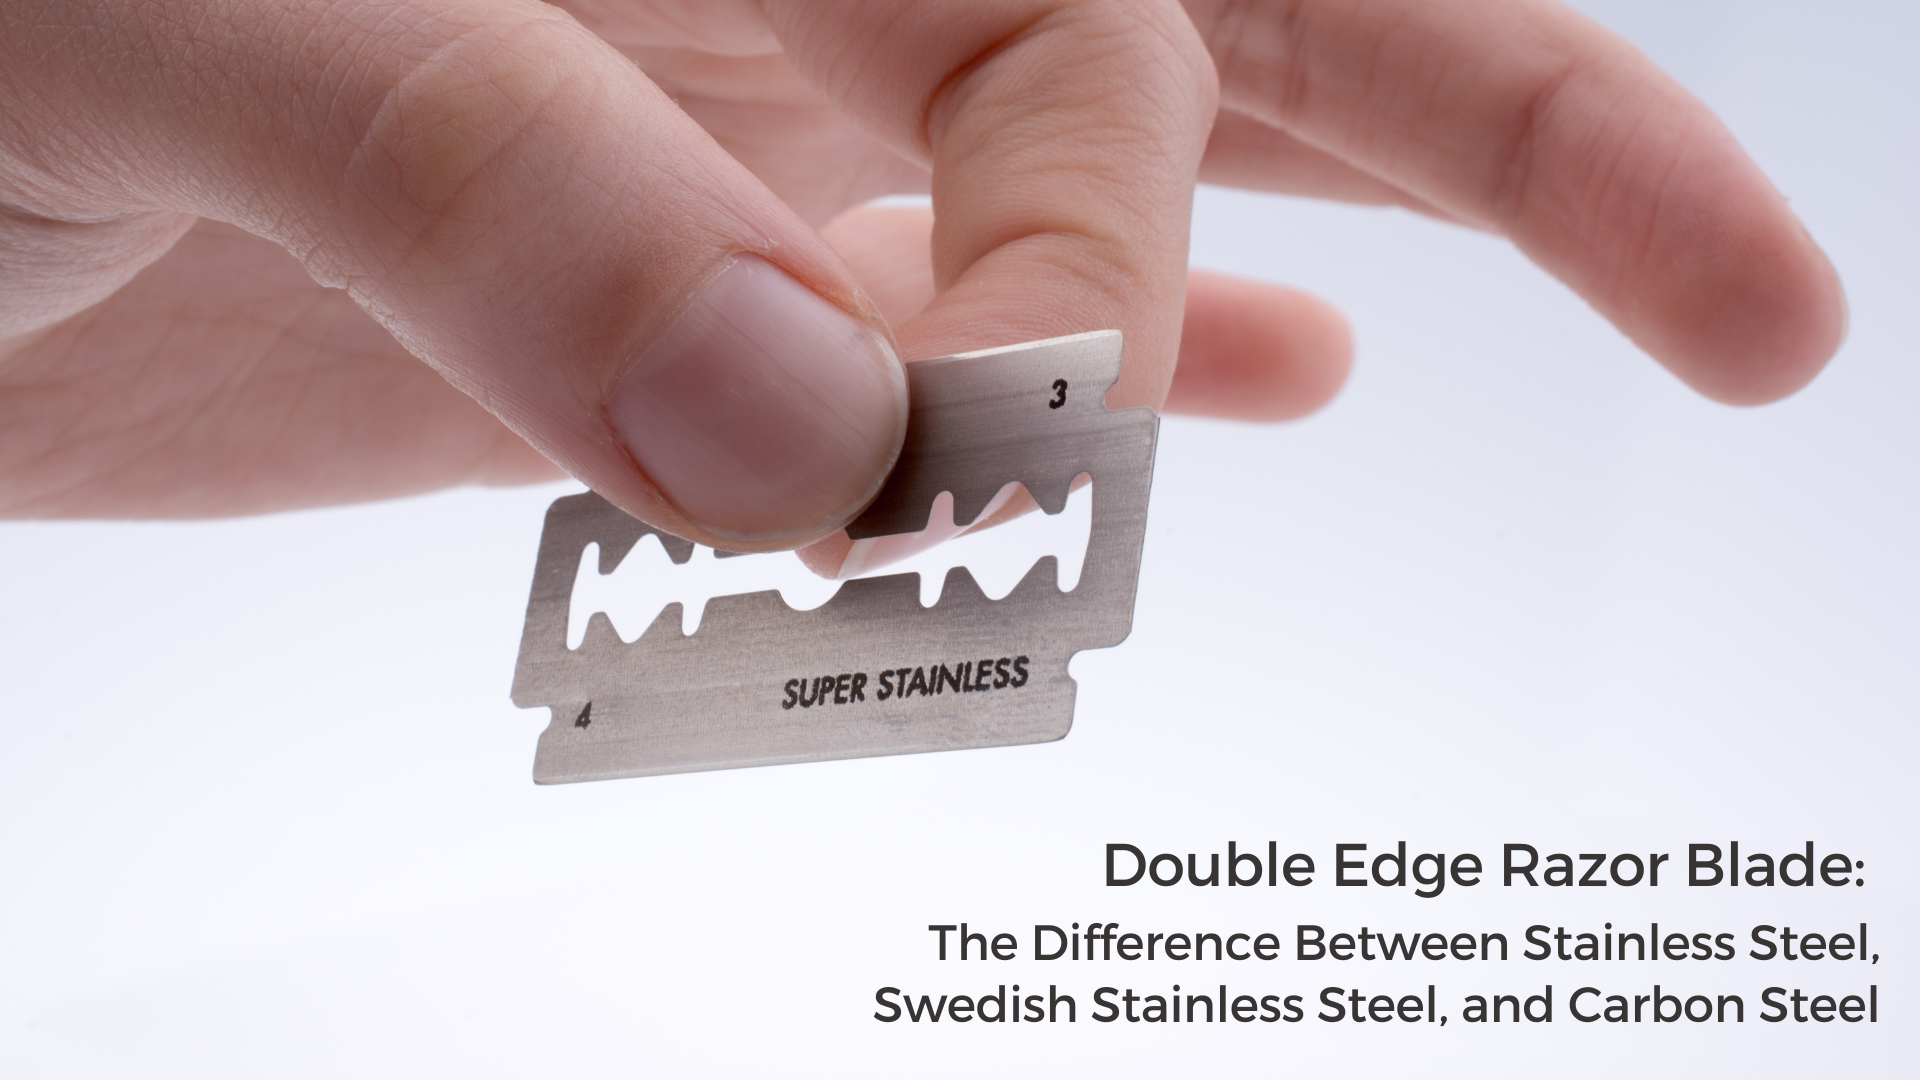 Double Edge Razor Blade: The Difference Between Stainless Steel, Swedish Stainless Steel, and Carbon Steel